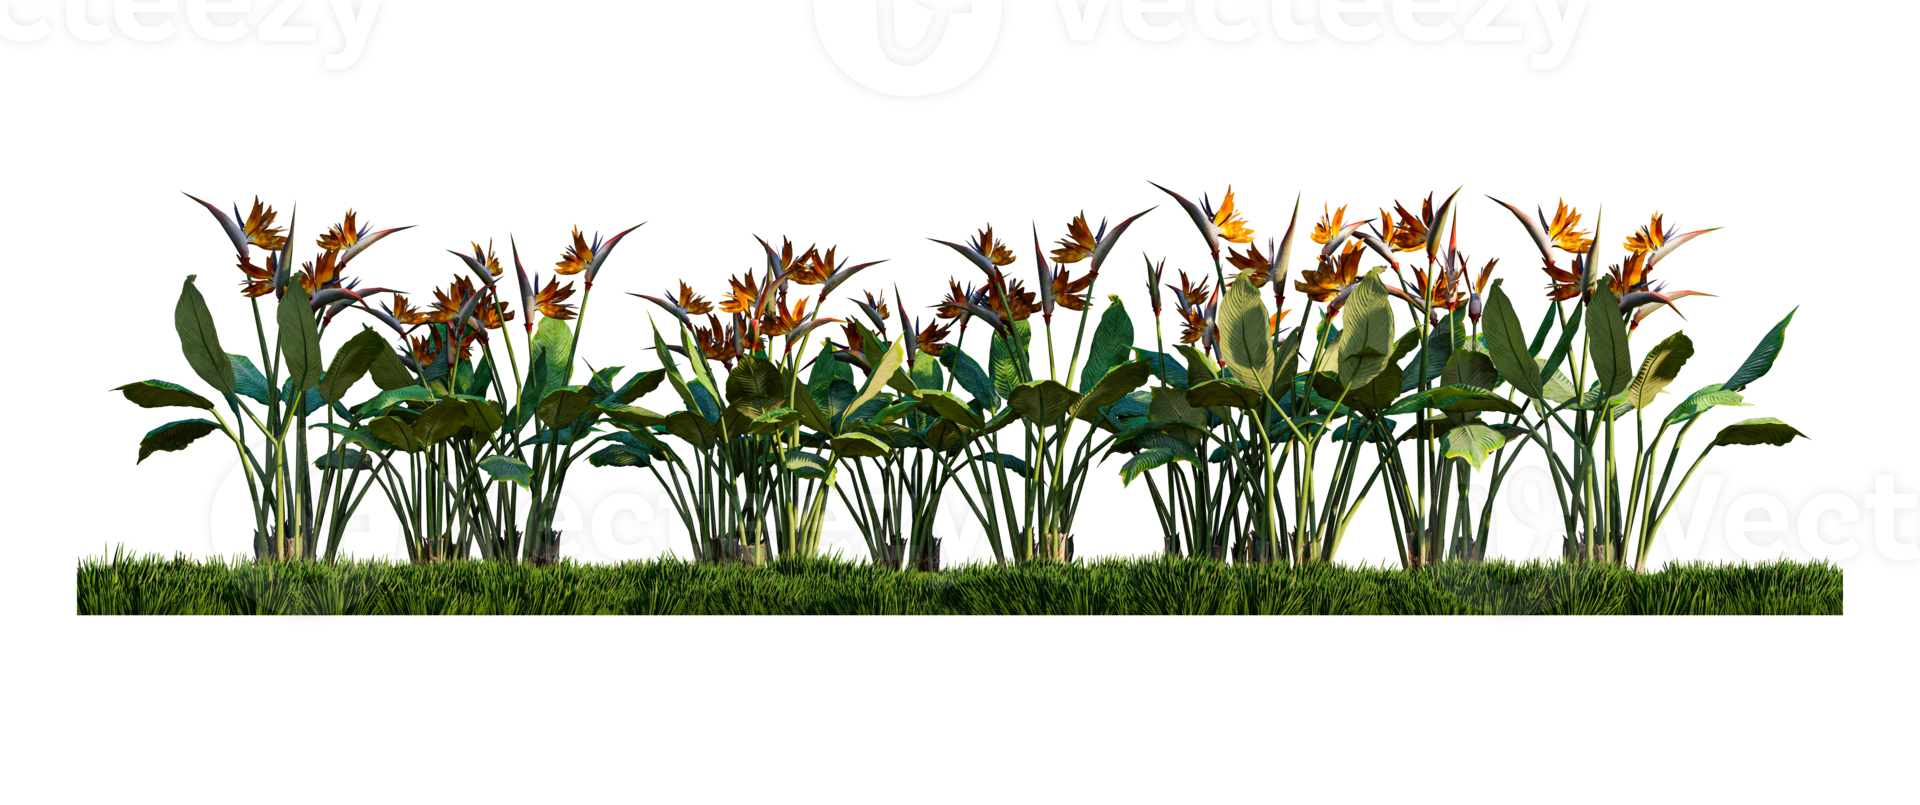 A 3d rendering image of birs of paradise on green grasses field png